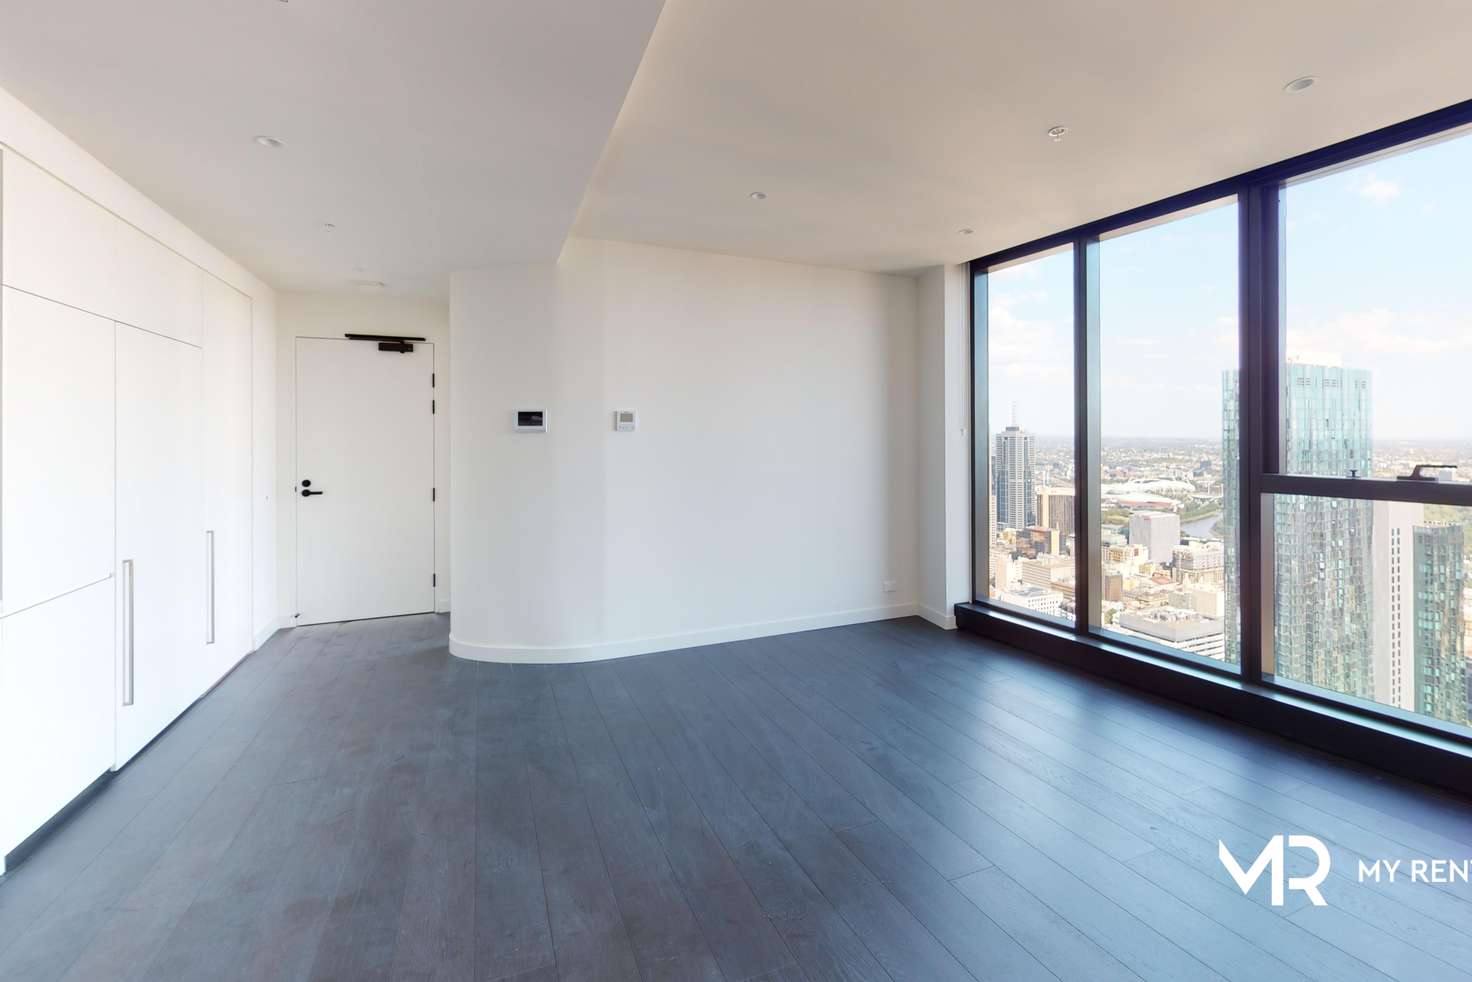 Main view of Homely apartment listing, 6109/370 Queens Street, Melbourne VIC 3000